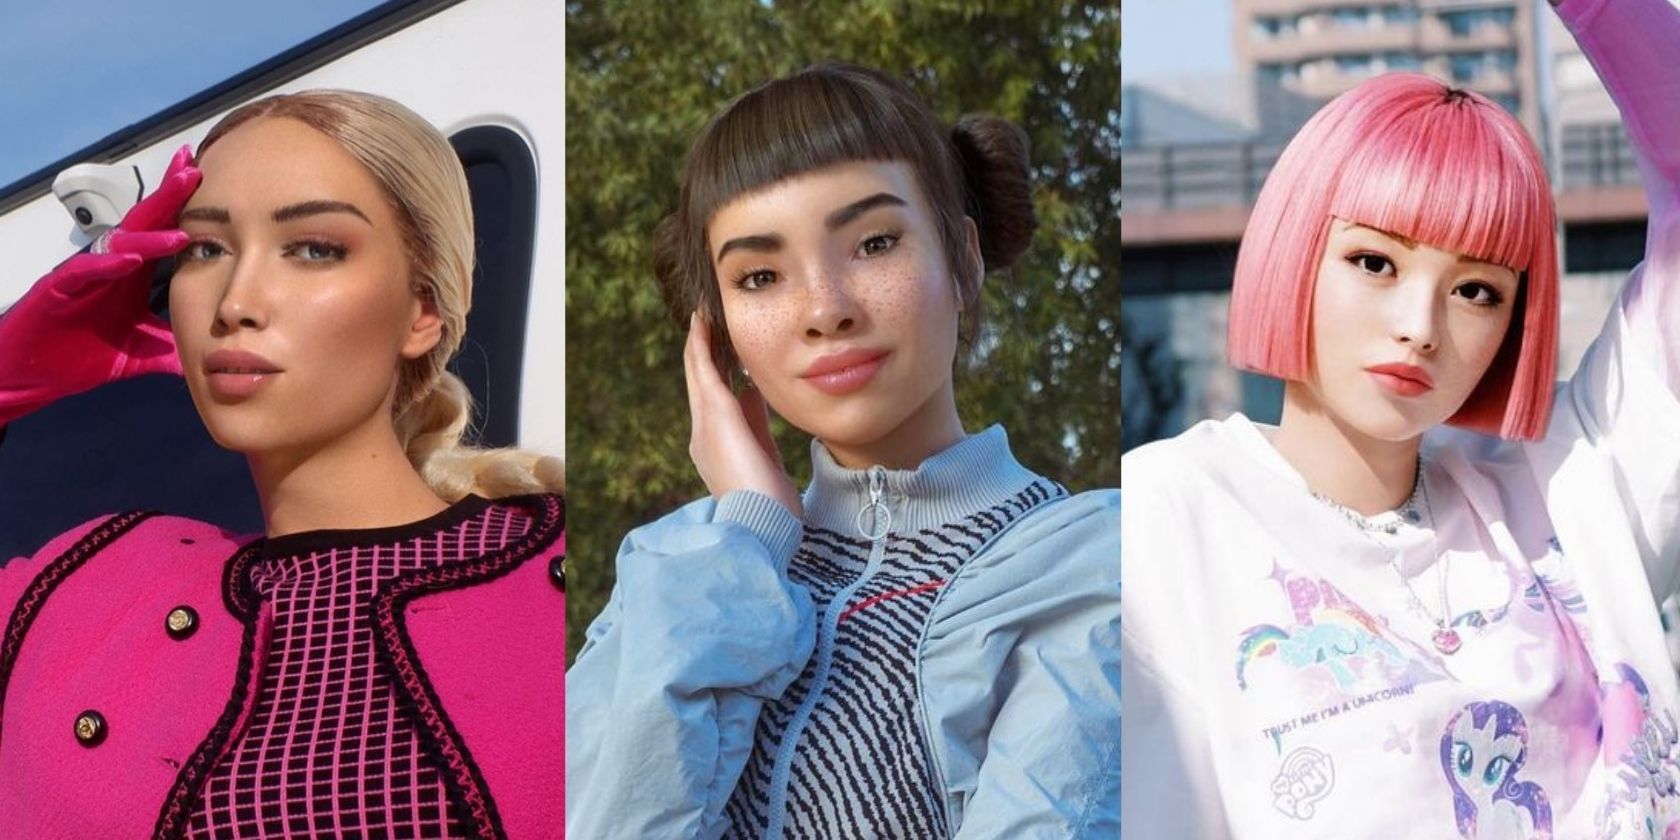 Three virtual influencers in a collage